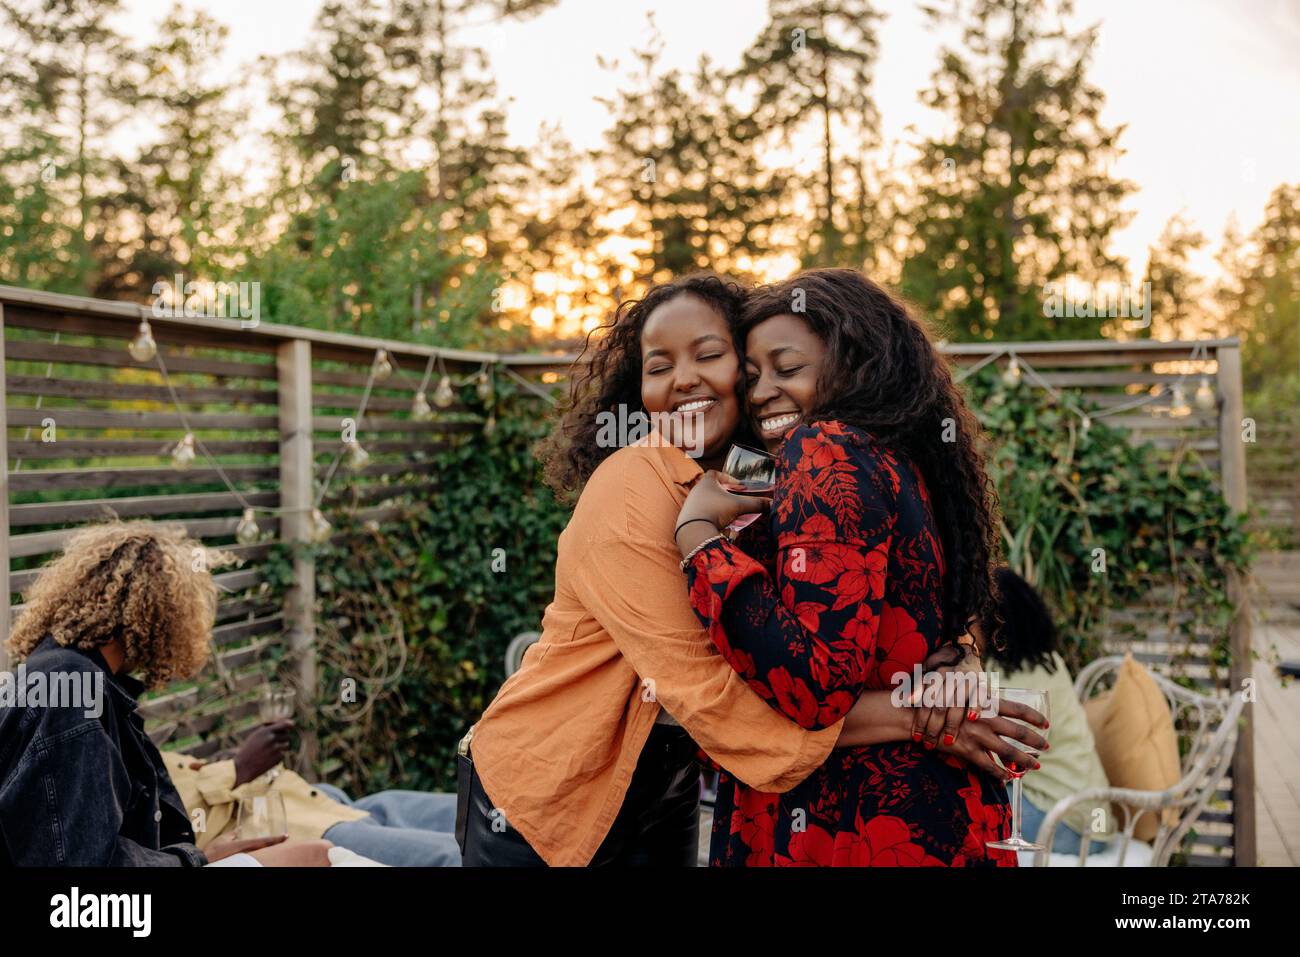 Women with eyes closed embracing each other during dinner party Stock Photo